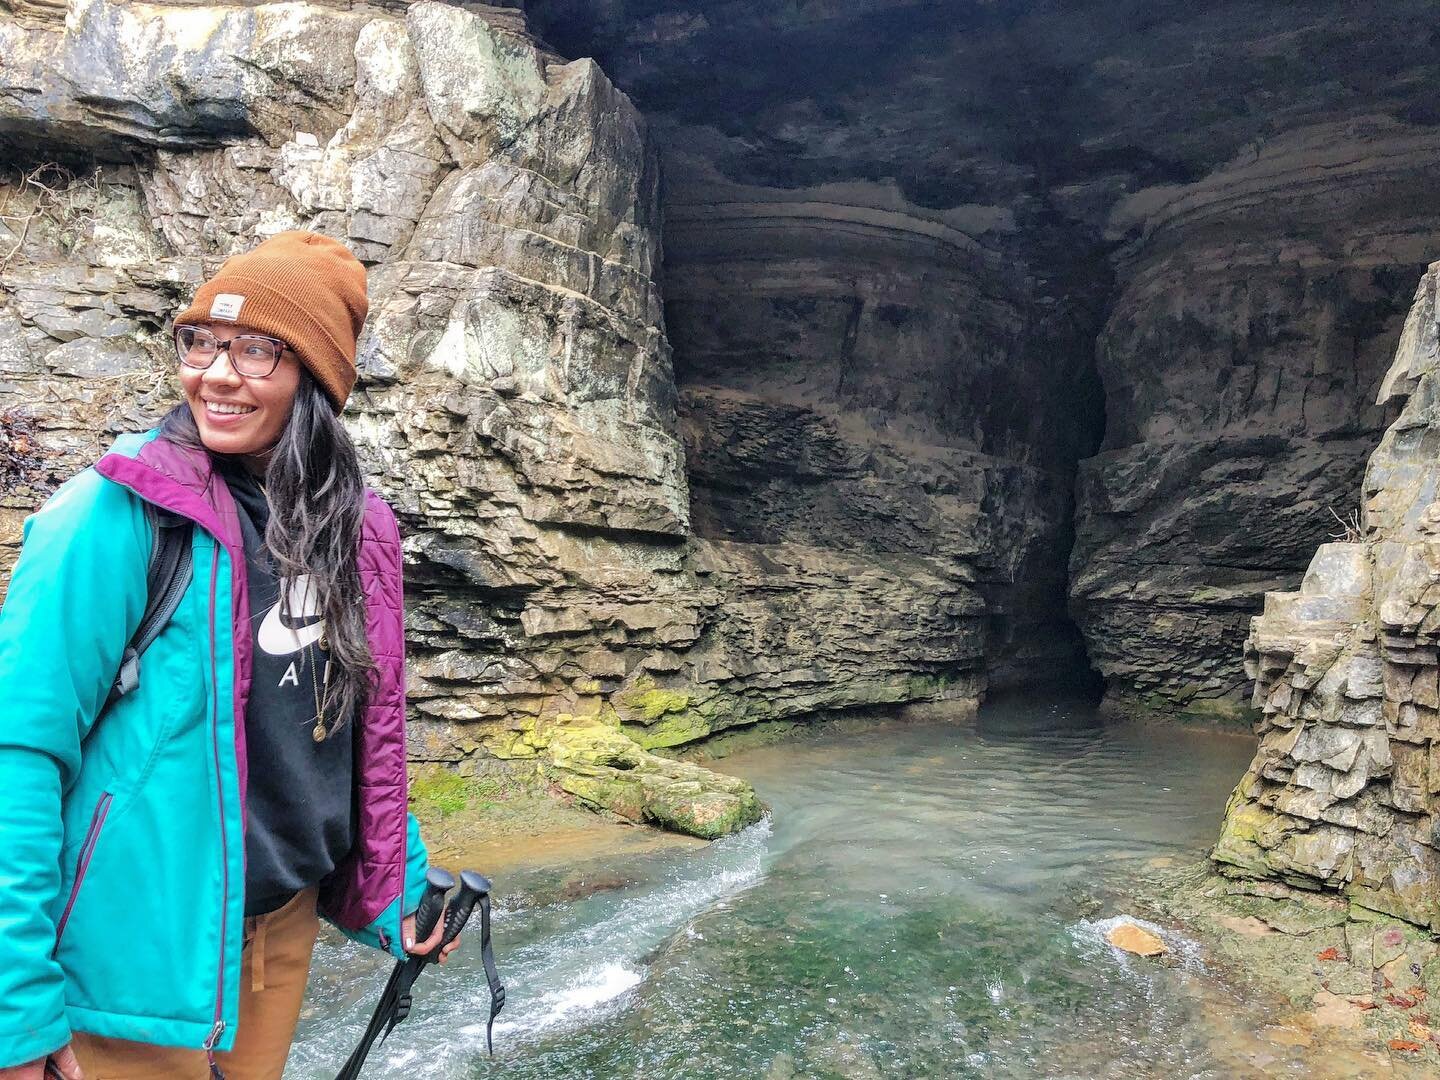 Whoever ranked Indiana the 13th most boring state in the US clearly hasn&rsquo;t accidentally hiked into a rattlesnake hibernacula, or stumbled upon the dozens of random caves, giant ruins, or waded thru flooded cornfields while a coyote side eyed yo